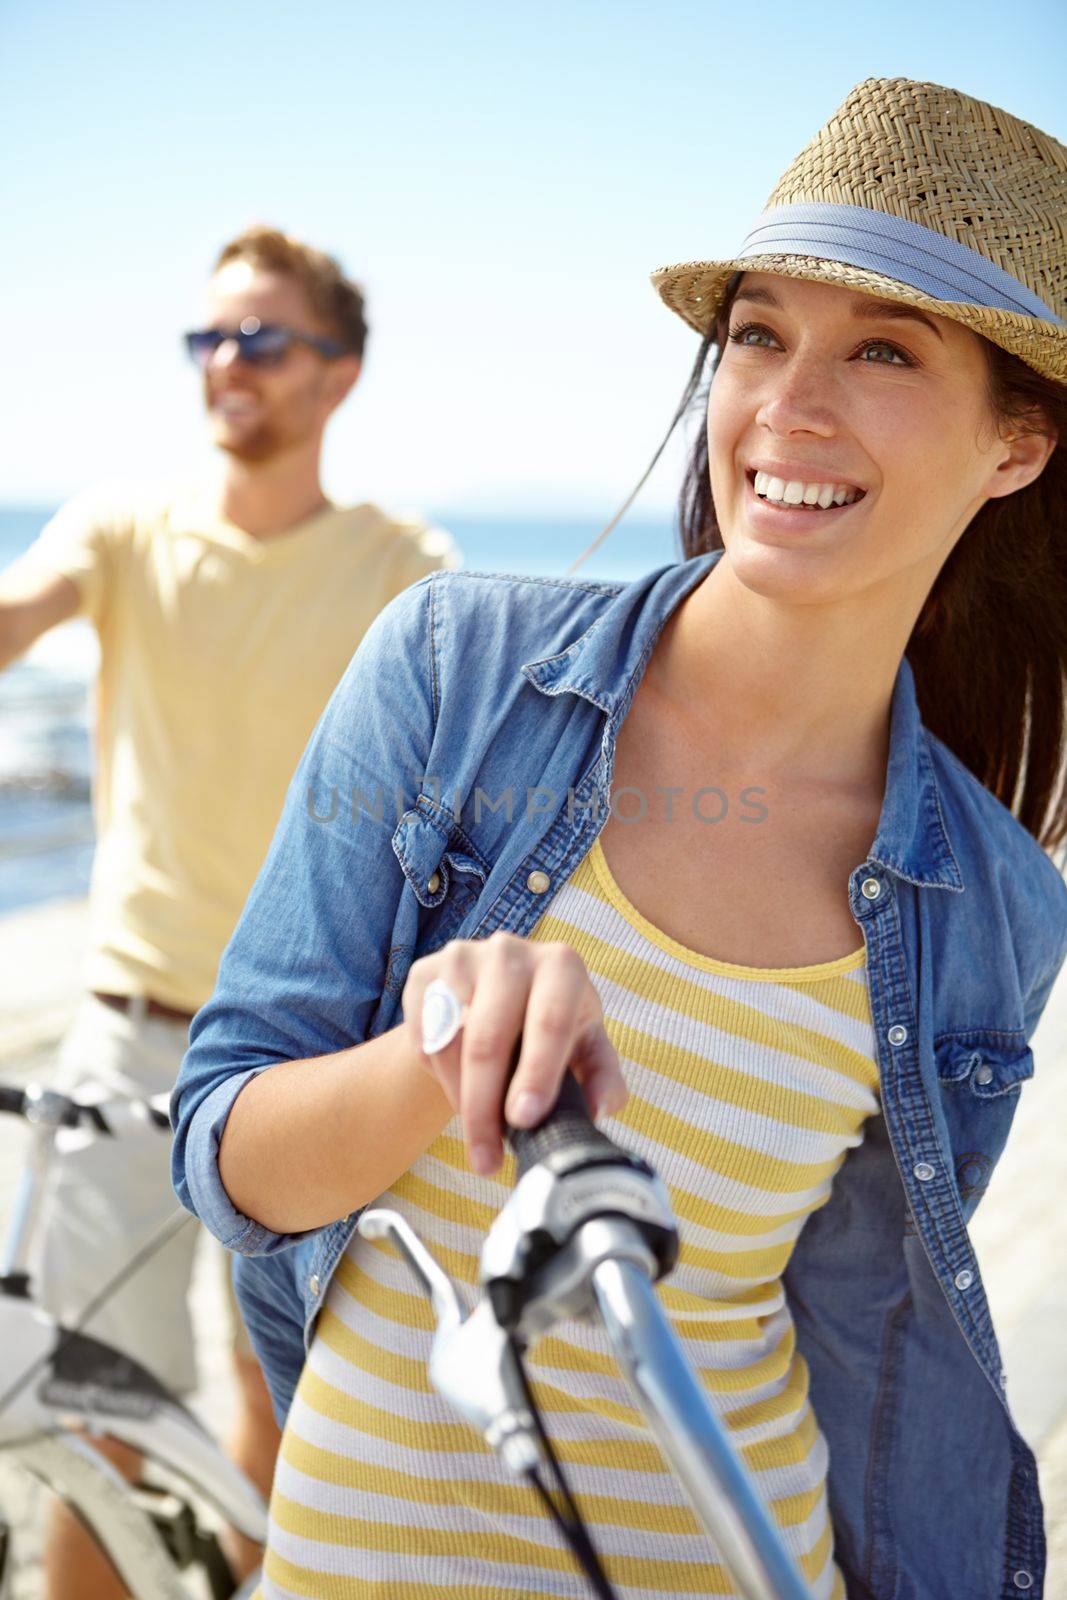 Bike, travel and couple with a woman on summer vacation or holiday riding on the promenade by the beach. Freedom, date and romance with a girlfriend outdoor for a ride on the coast during the day.